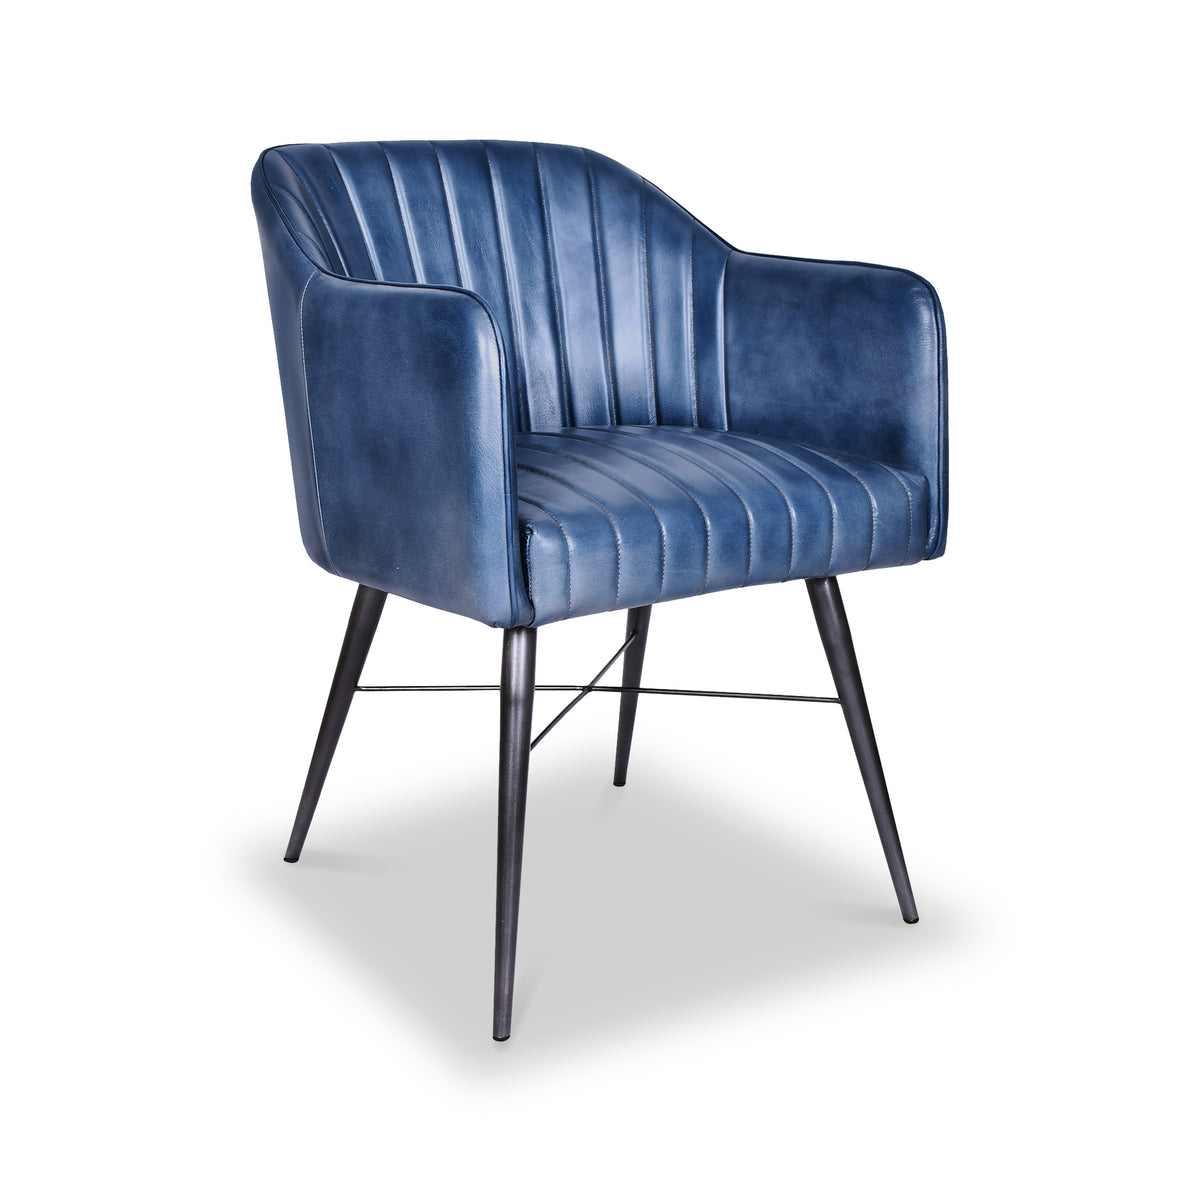 Aitor Blue Leather Carver Chair with Pleated Back from Roseland Furniture